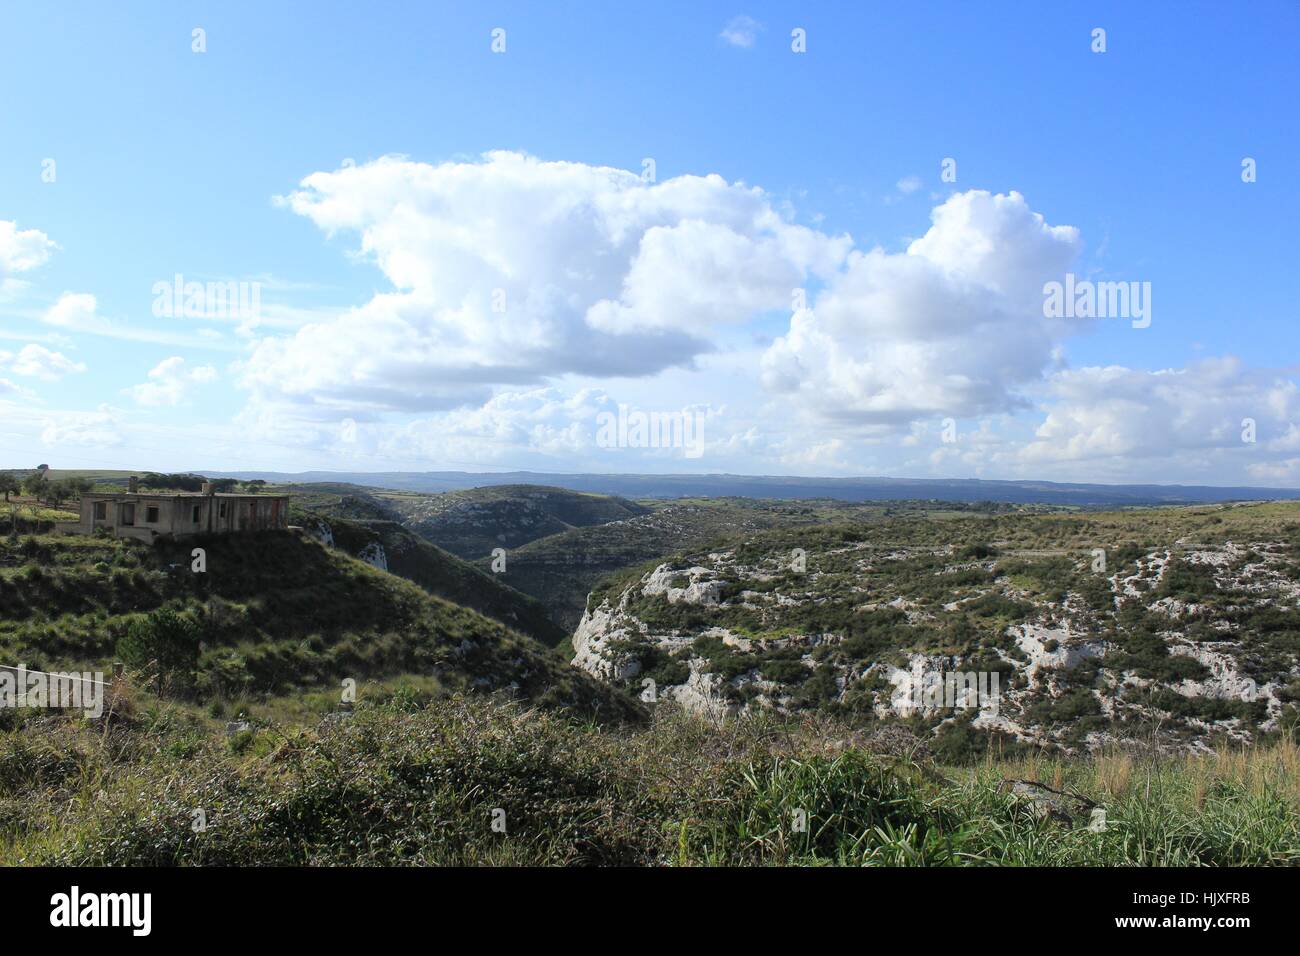 Cumulonimbus clouds float in a blue sky over the rolling hills of Sicily. Stock Photo